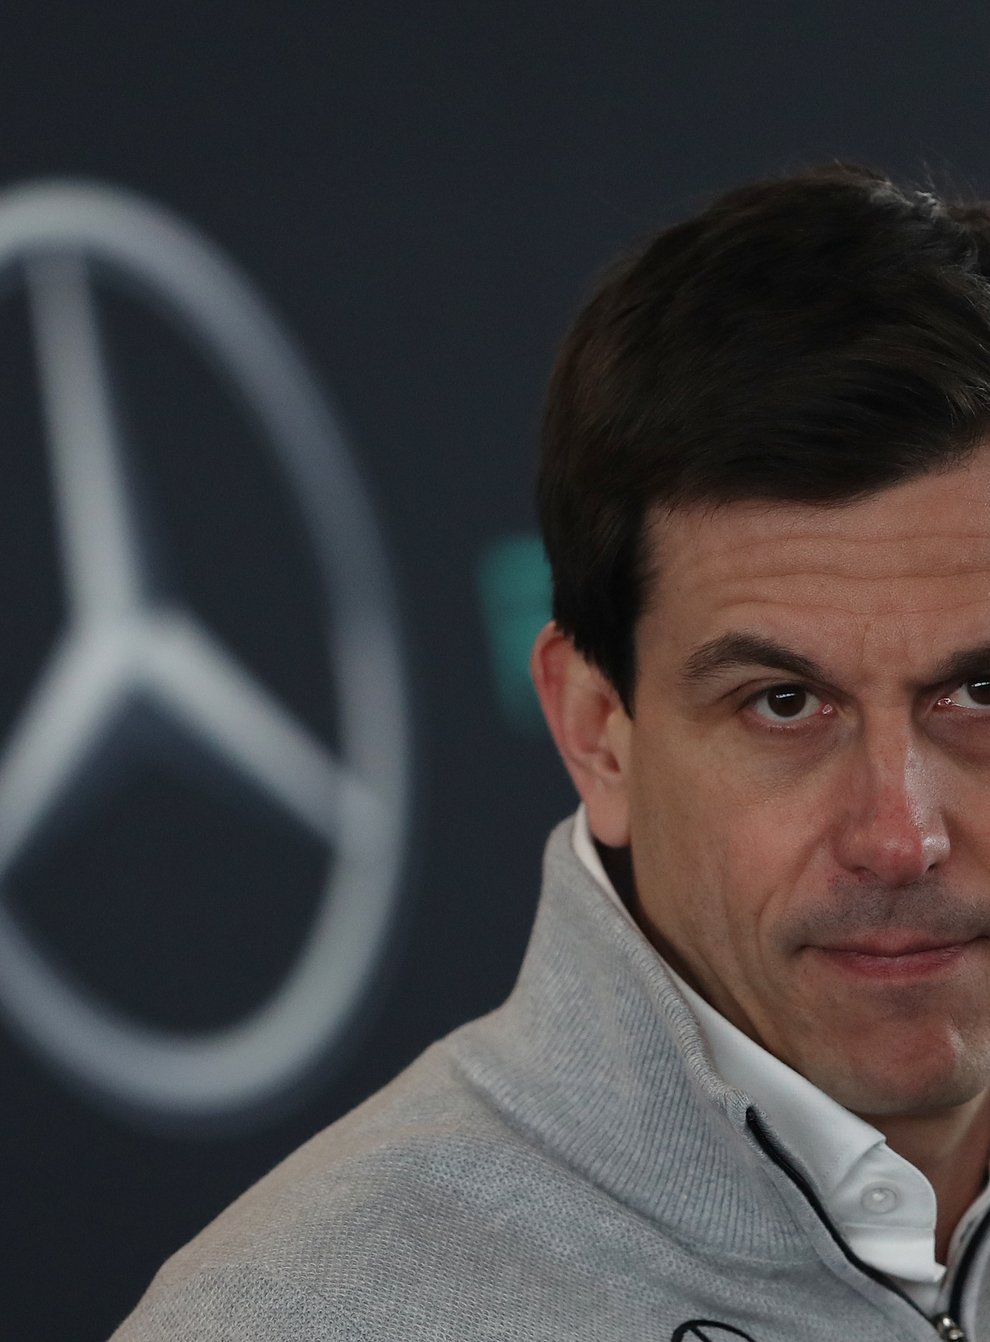 Mercedes team principle Toto Wolff, pictured, has seen his driver Lewis Hamilton fall 12 points adrift in title race (David Davies/PA)